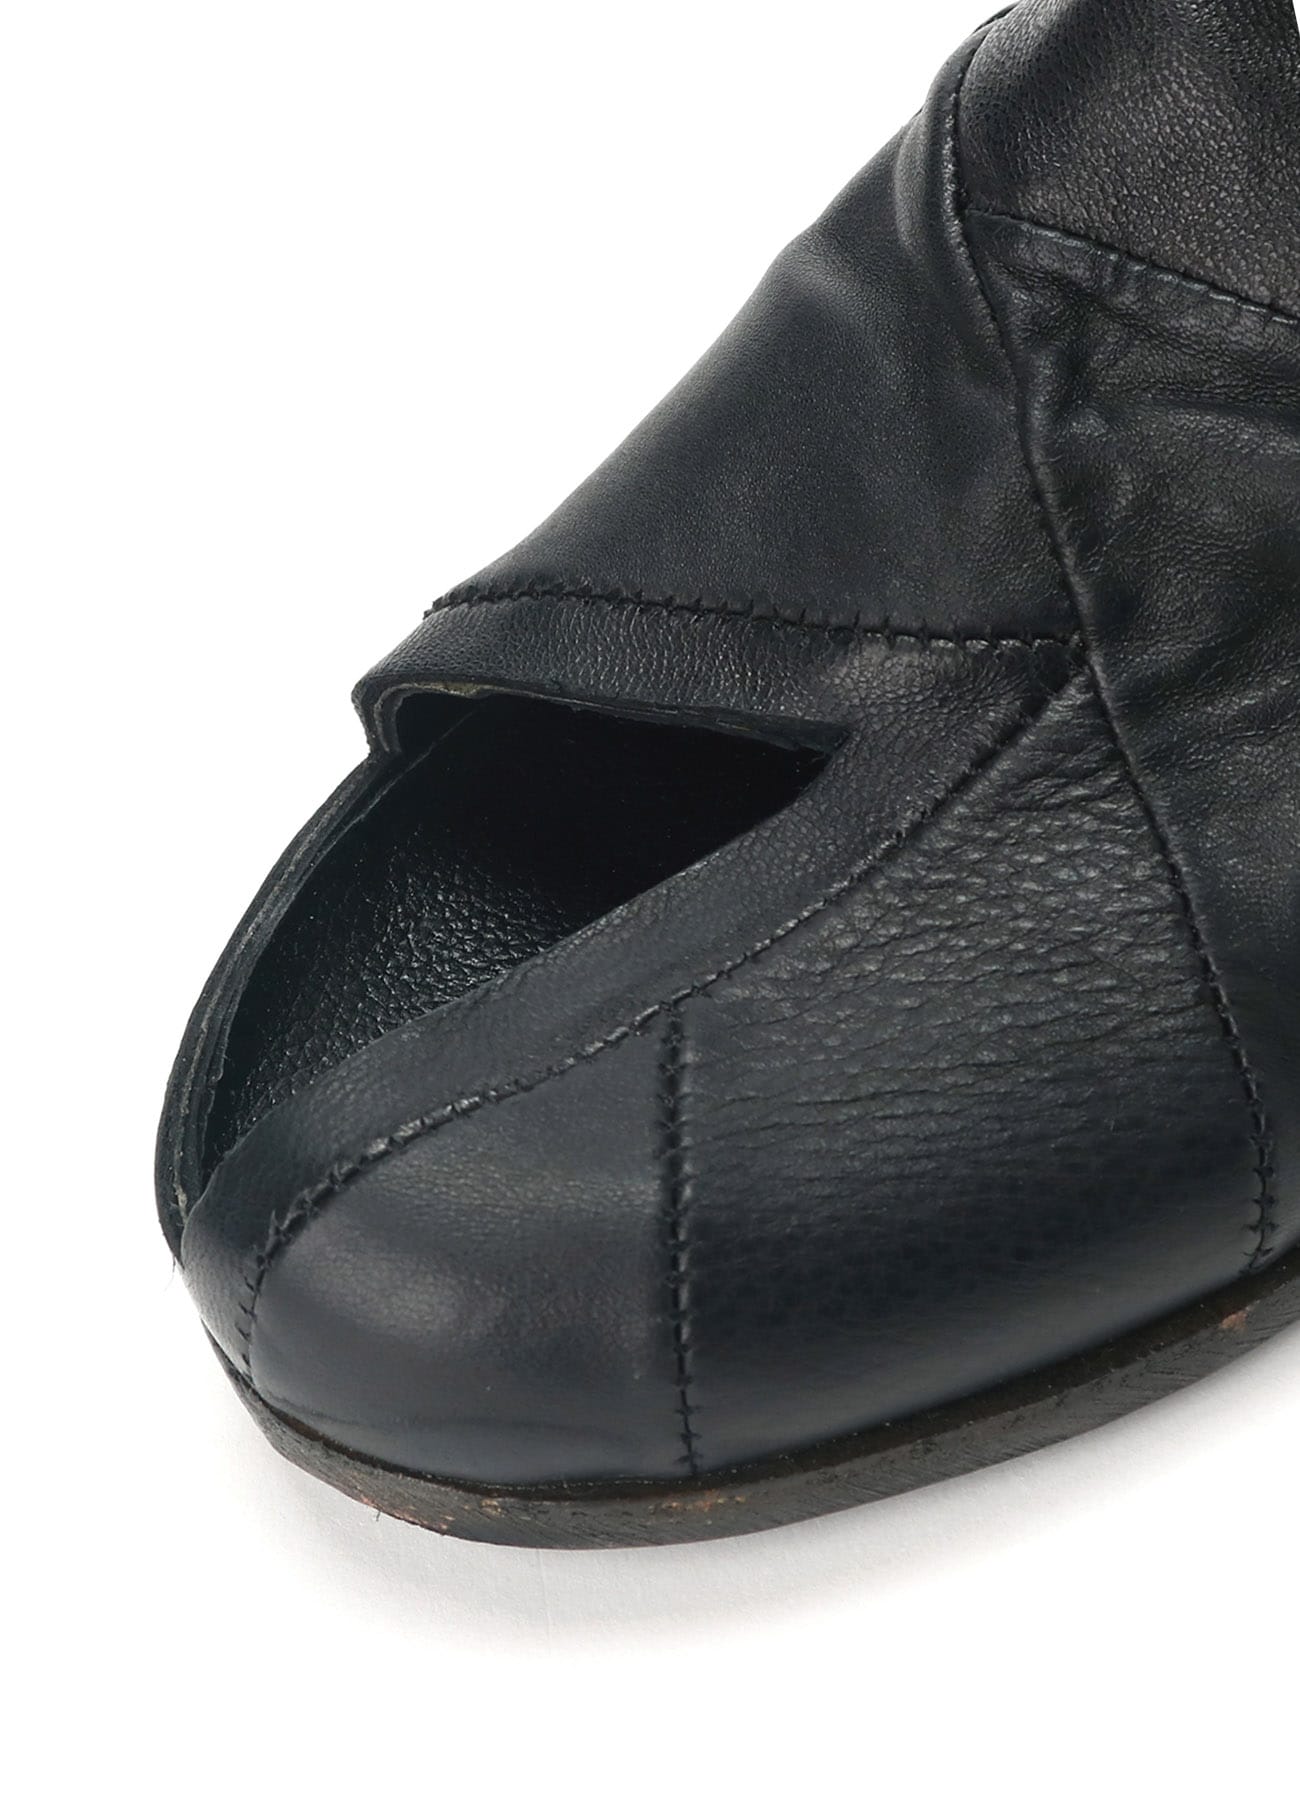 BLACK GOAT LEATHER BOOTS